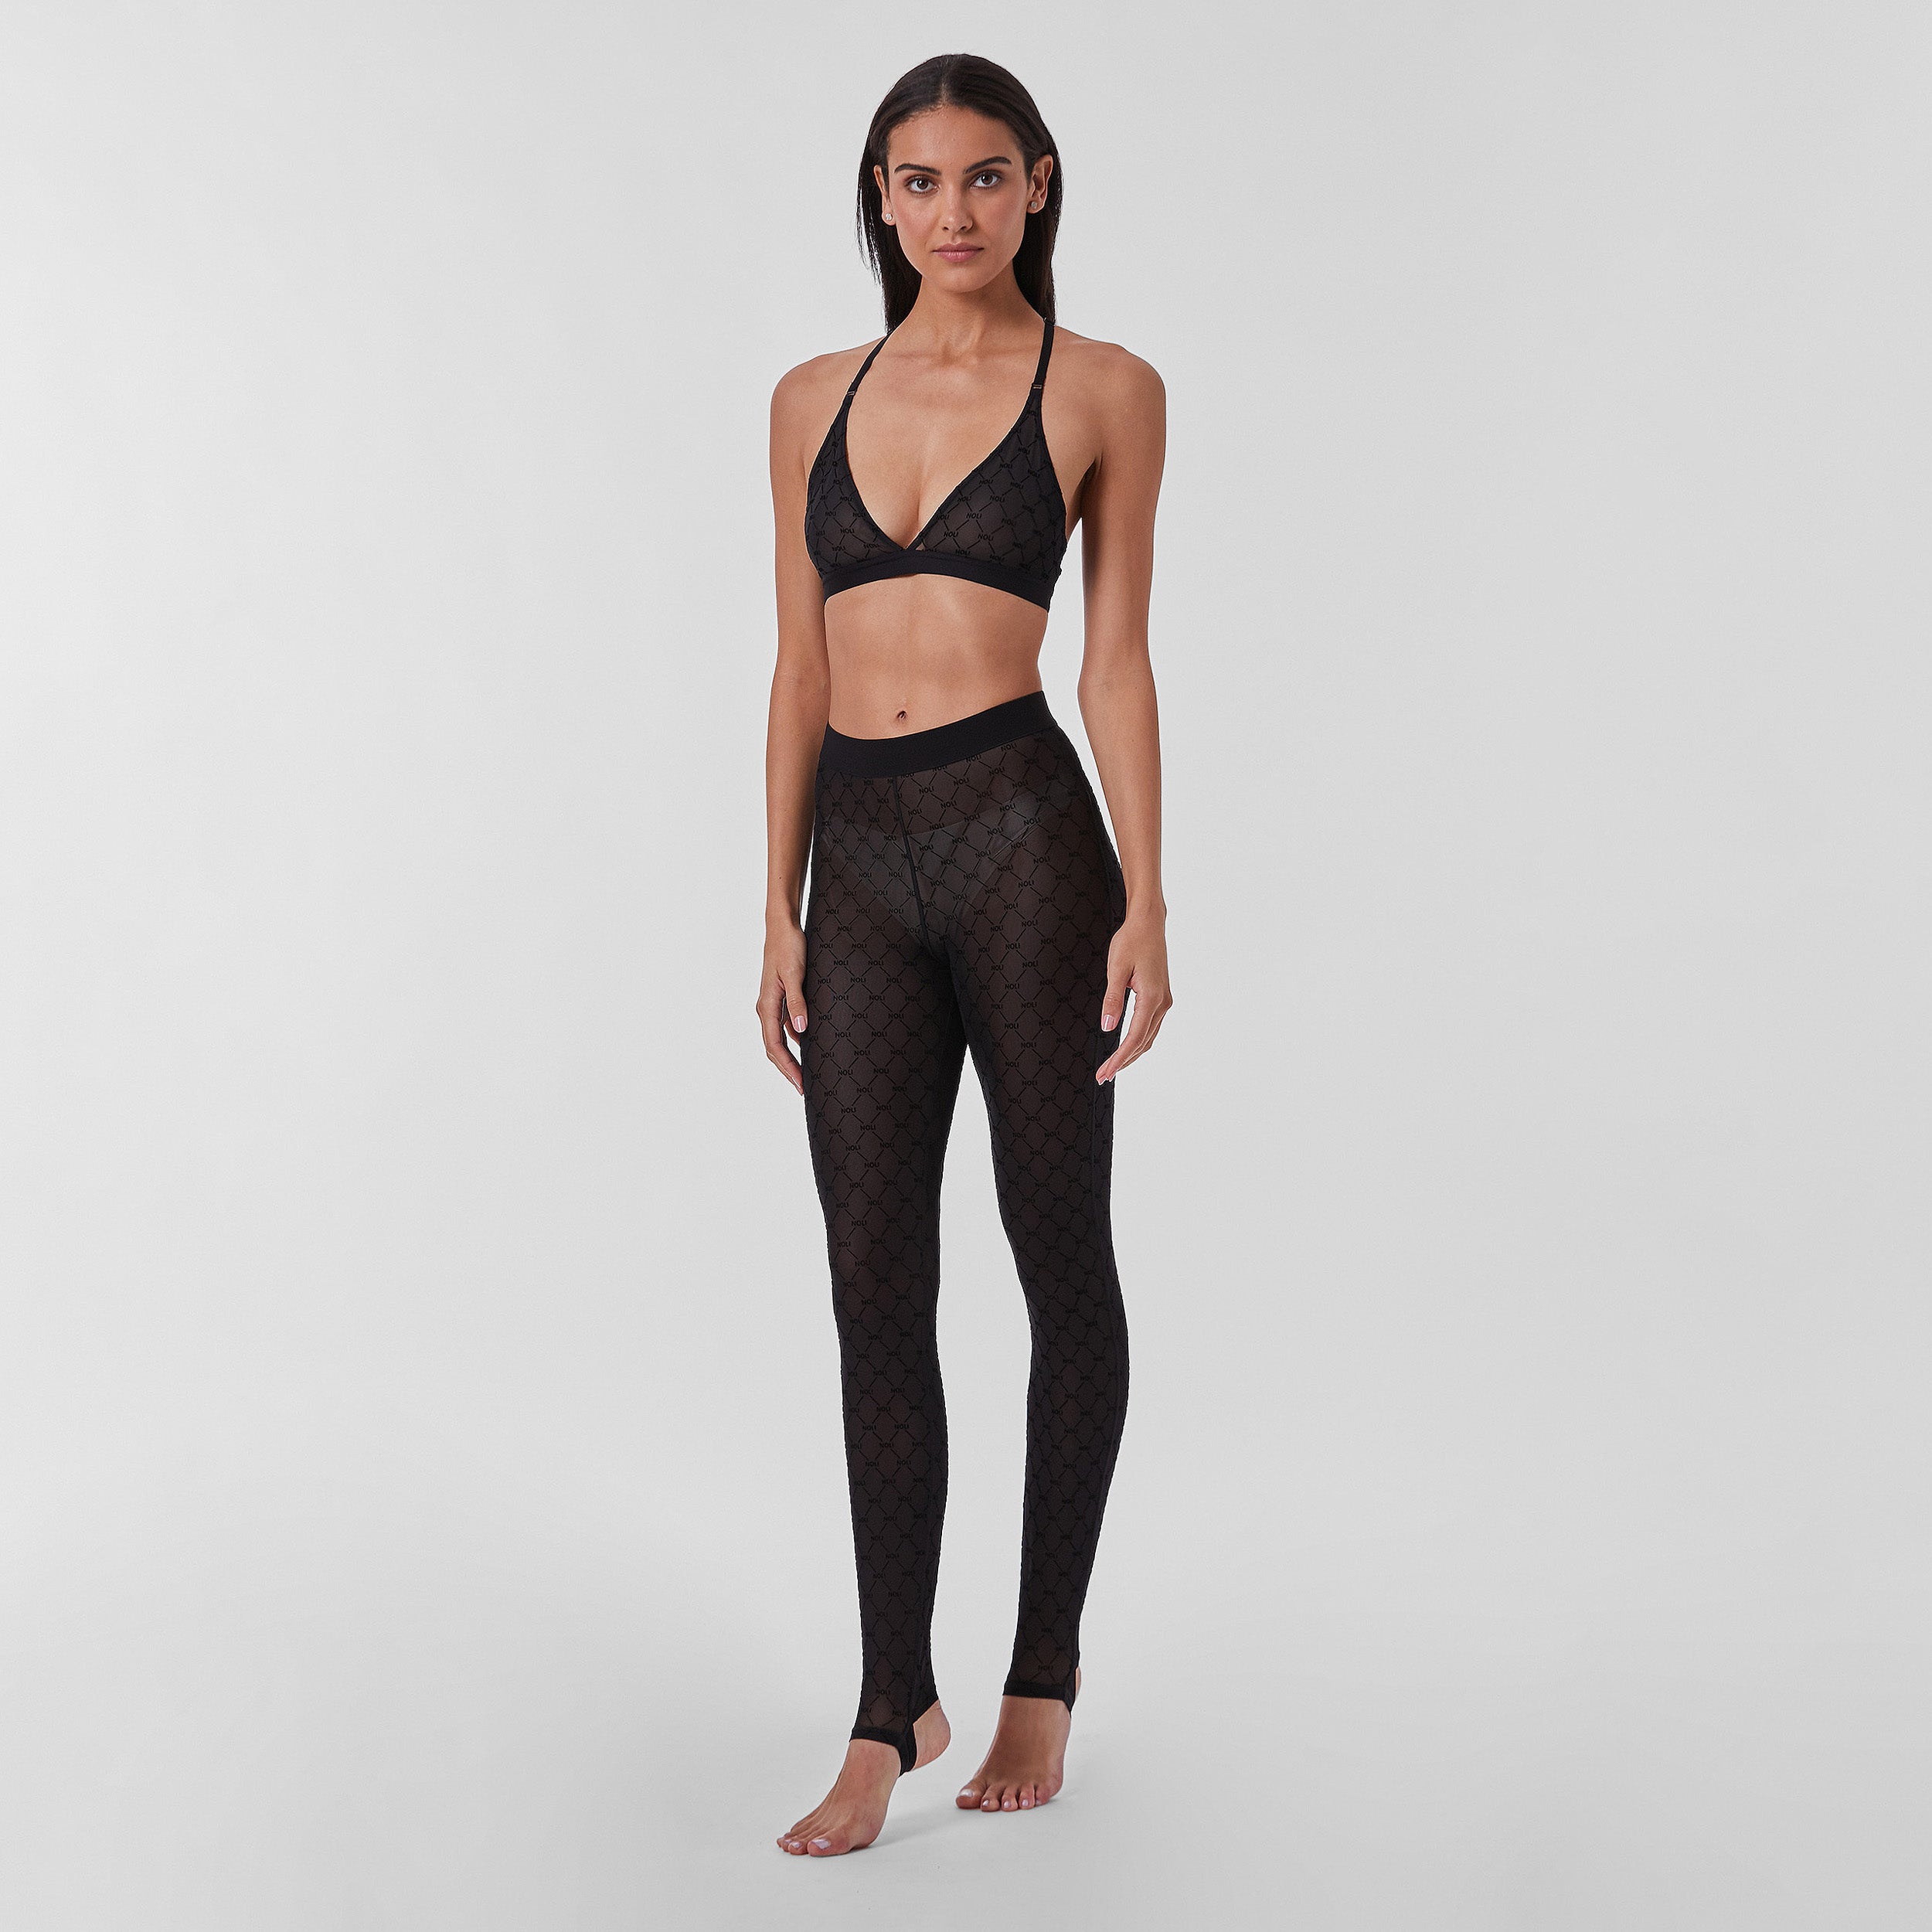 Full view of woman wearing tights featuring ultra-soft and comfortable NOLI monogram mesh, slip this four-way stretch mesh